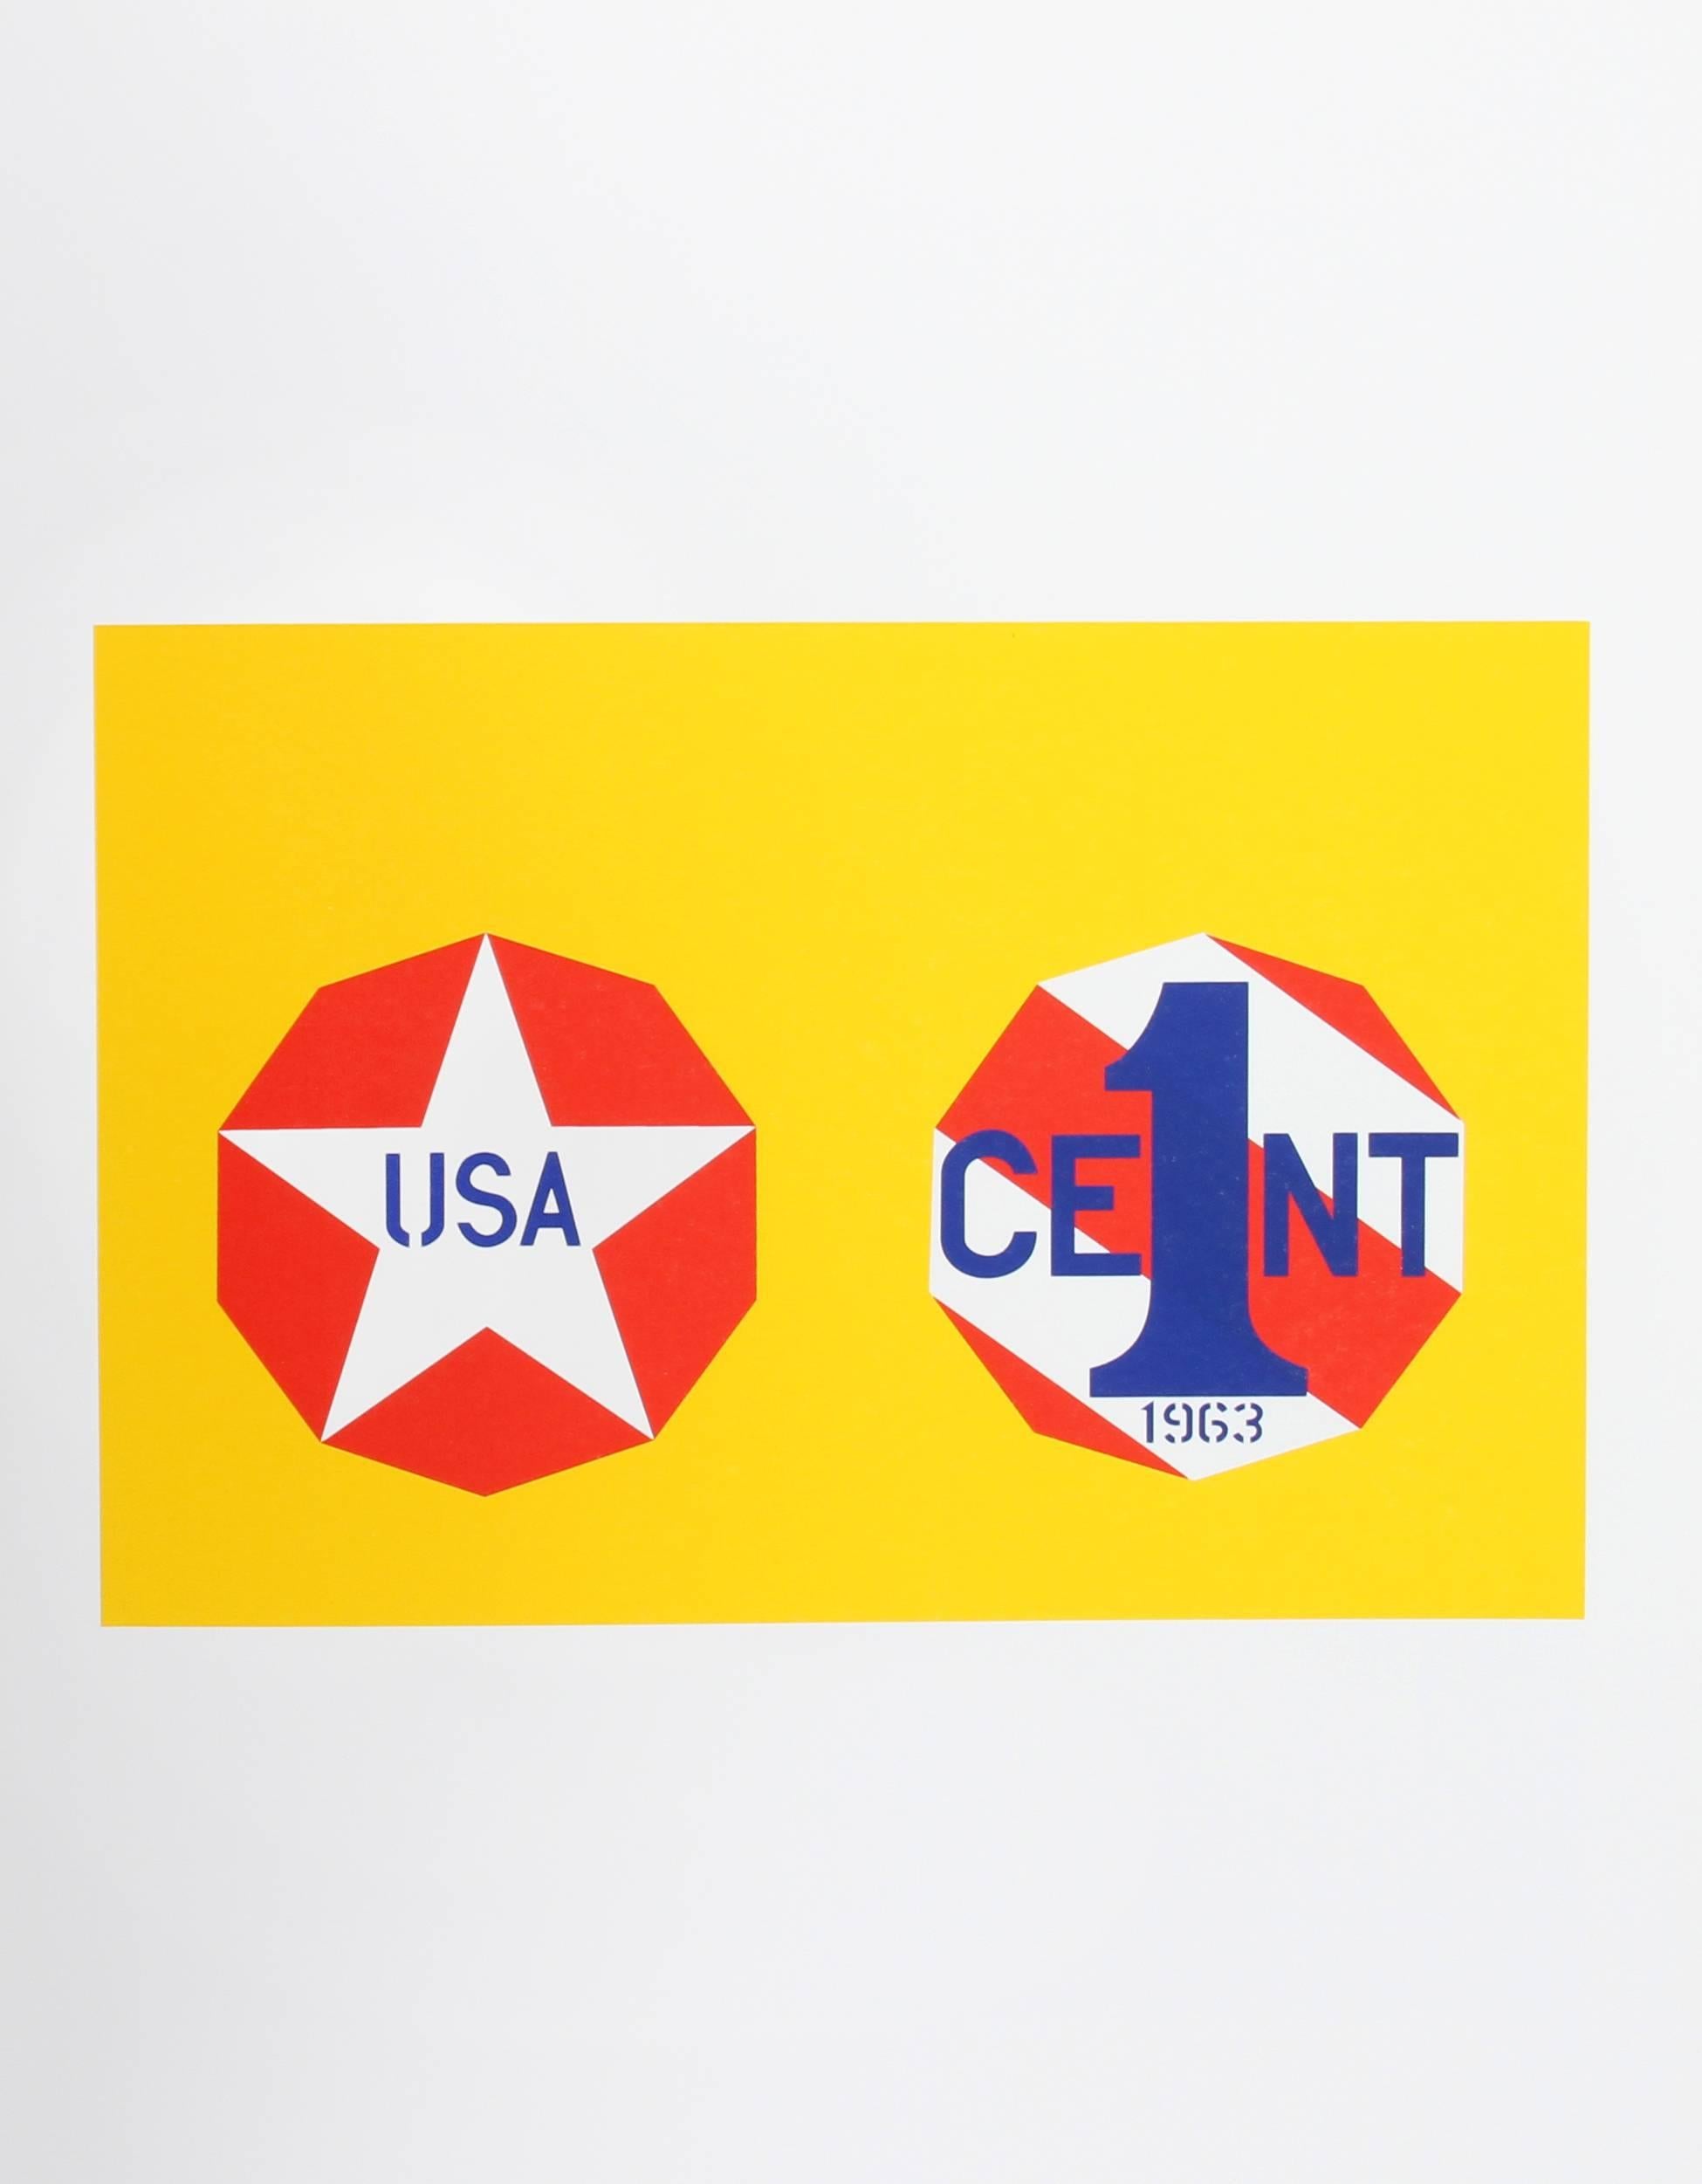 "The New Glory Penny", from the American Dream Portfolio by Robert Indiana